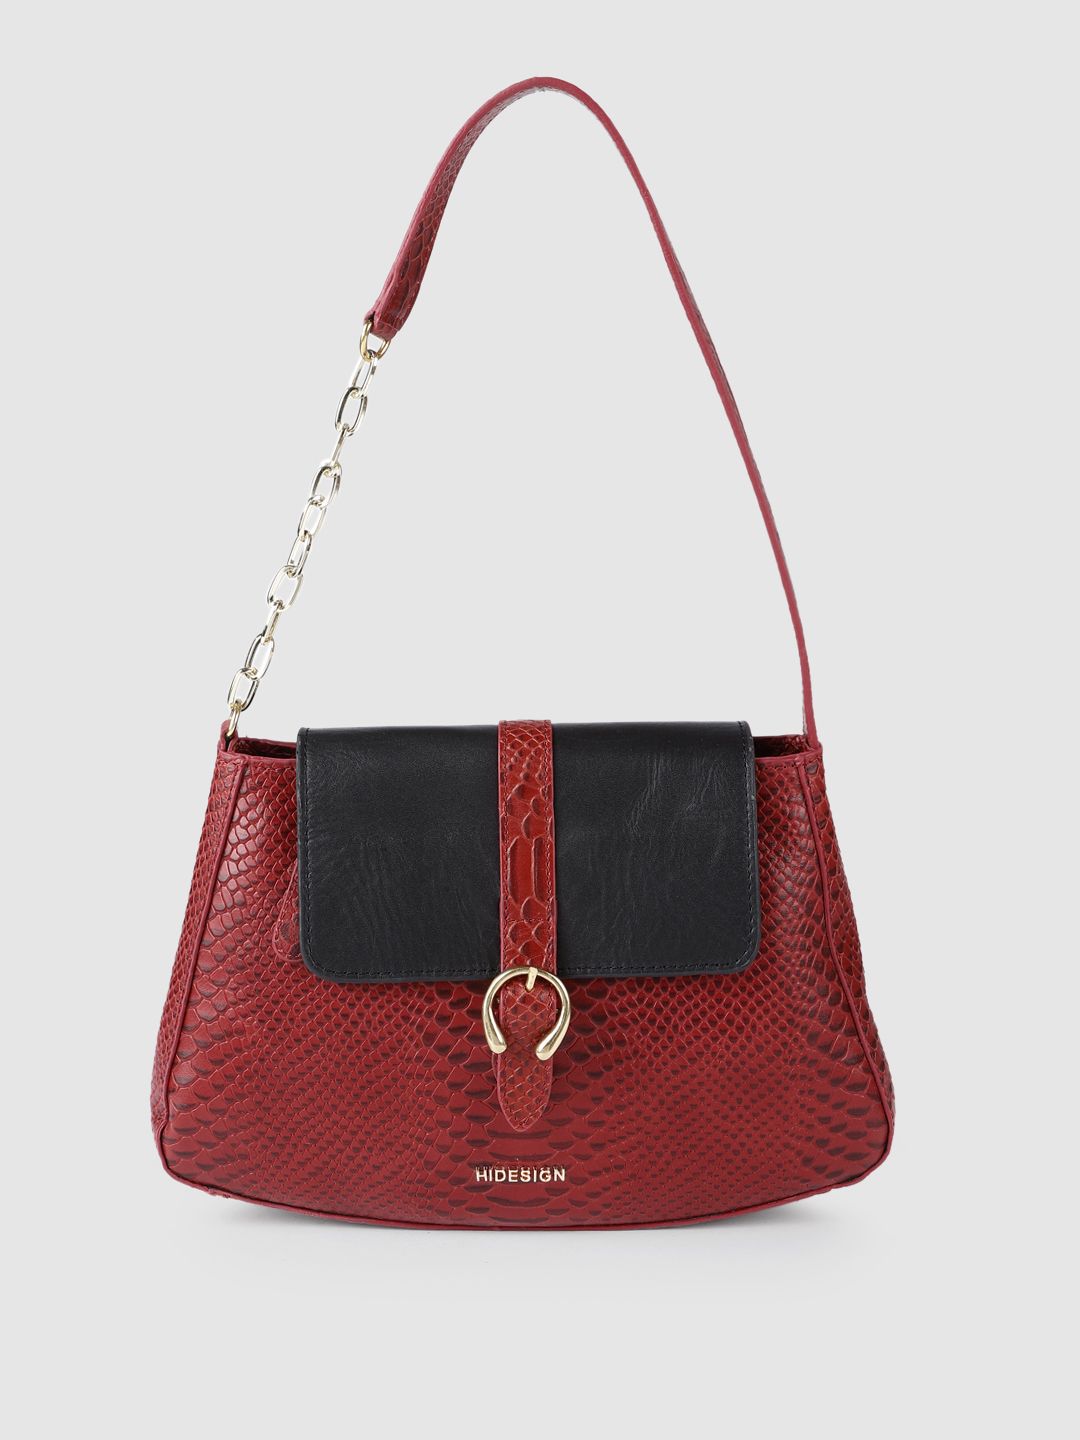 Hidesign Red Animal Textured Leather Structured Shoulder Bag Price in India